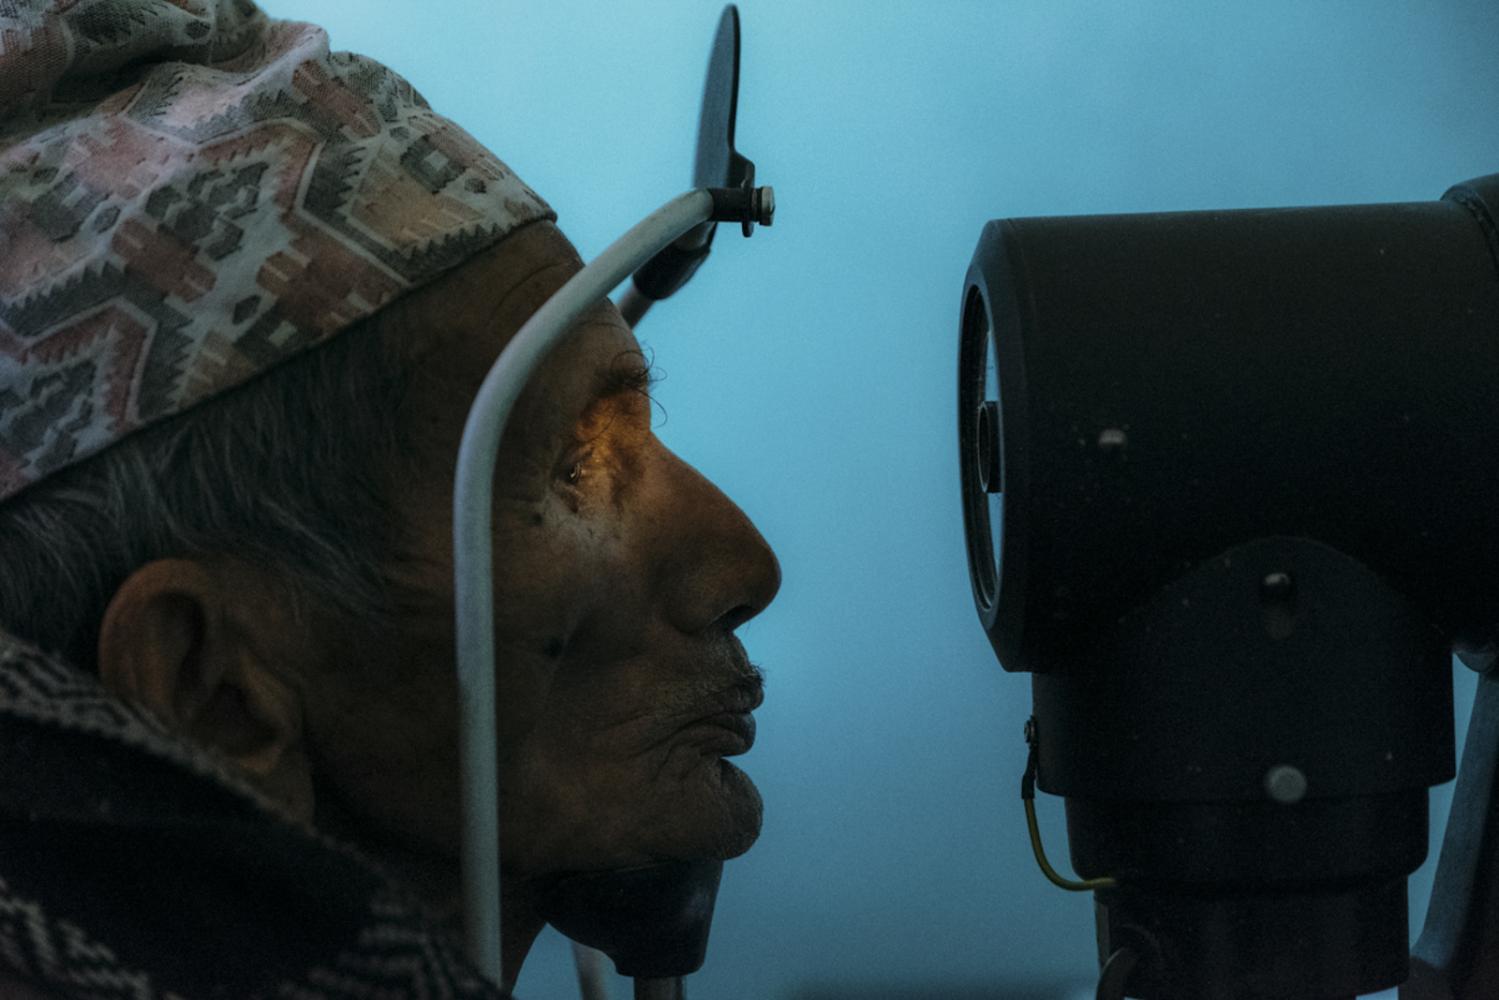 Chandra Bdr. Mangrati 78 yrs. old has his eyes auto refracted in a multi day vision clinic in Taplejung, Nepal. Many of the blind are elderly and living in poverty. Having vision restored provides them the opportunity to change their circumstances.